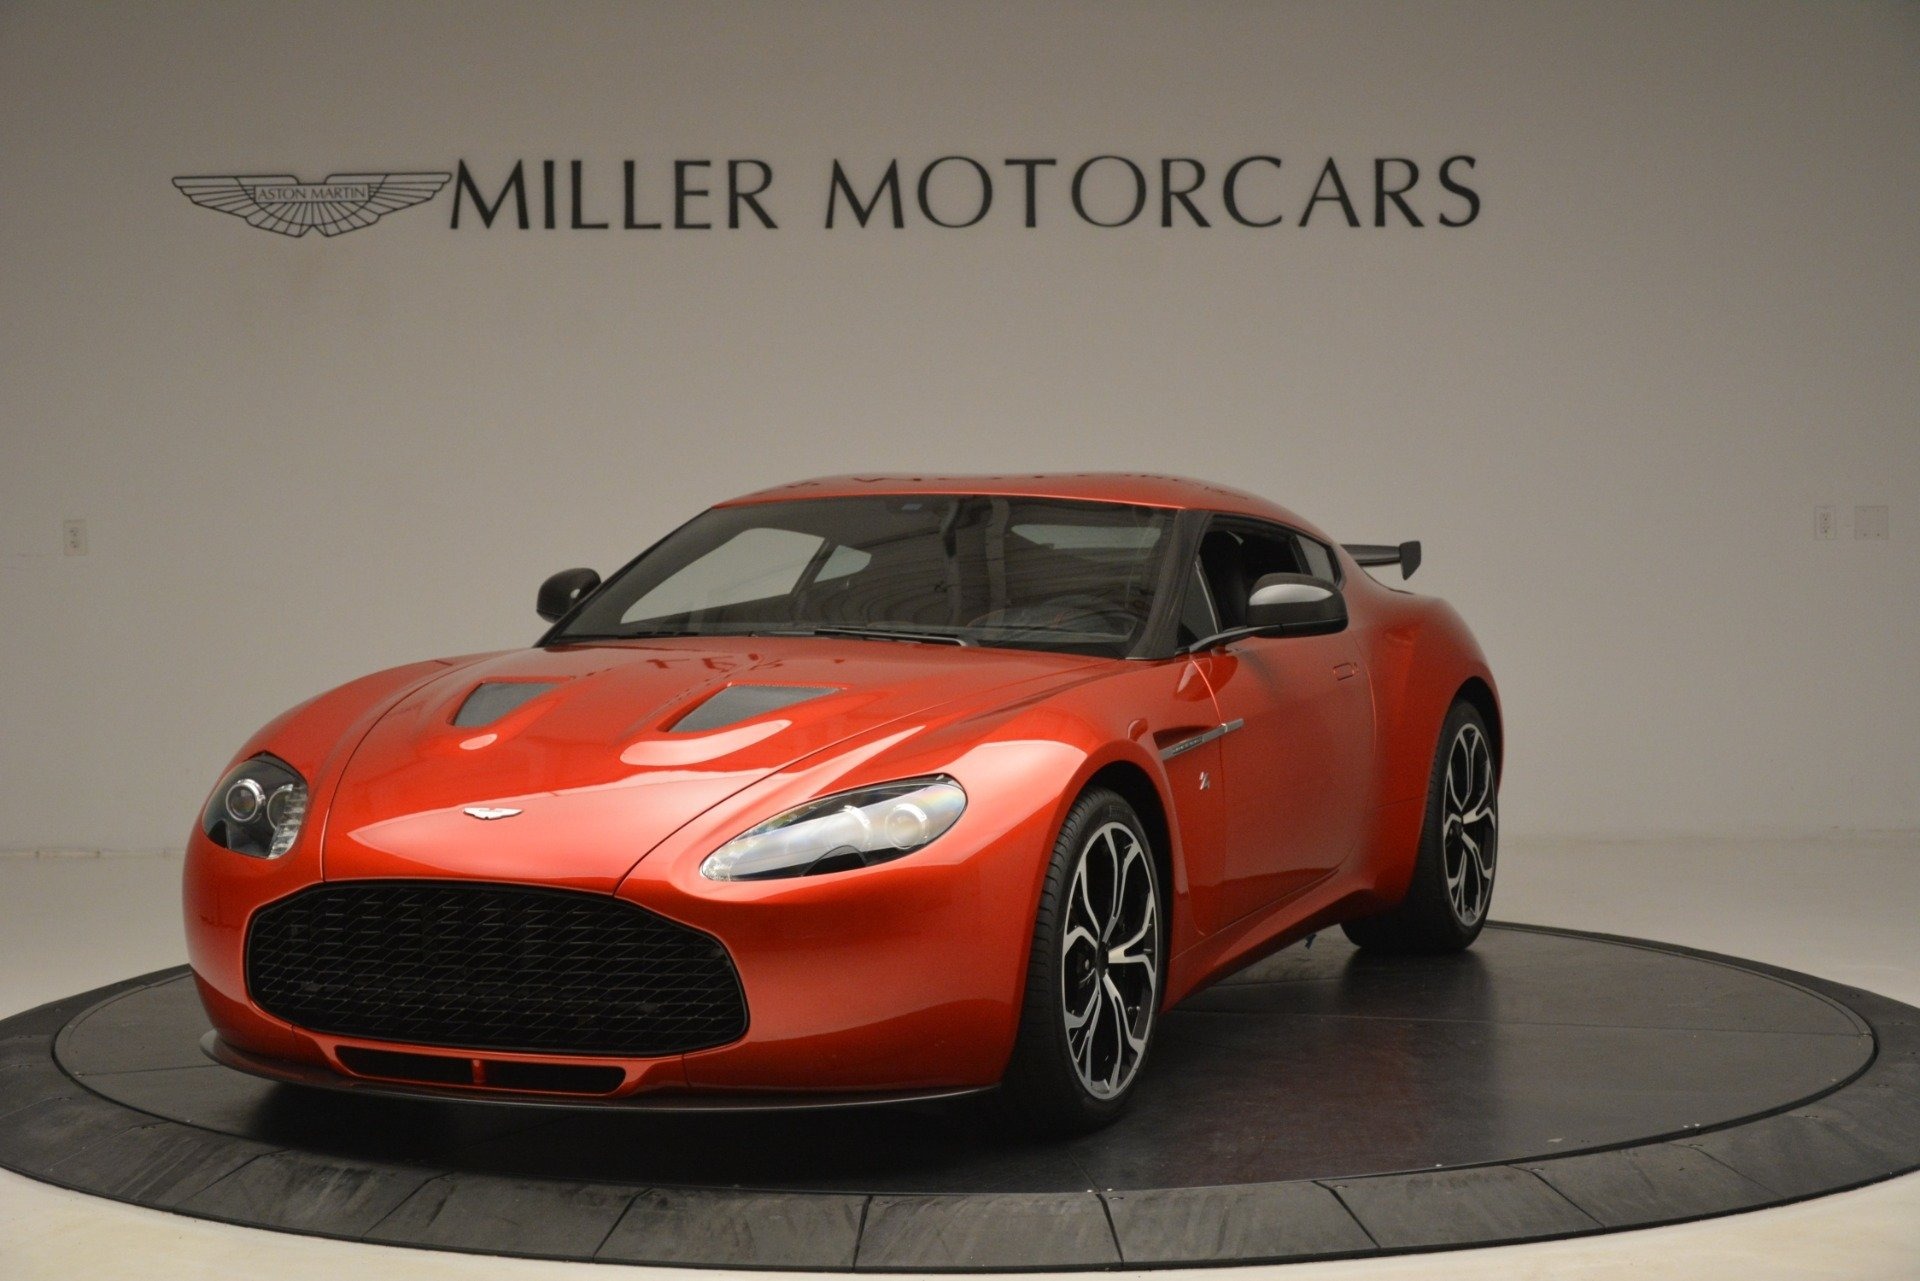 Used 2013 Aston Martin V12 Zagato Coupe for sale Sold at Alfa Romeo of Westport in Westport CT 06880 1